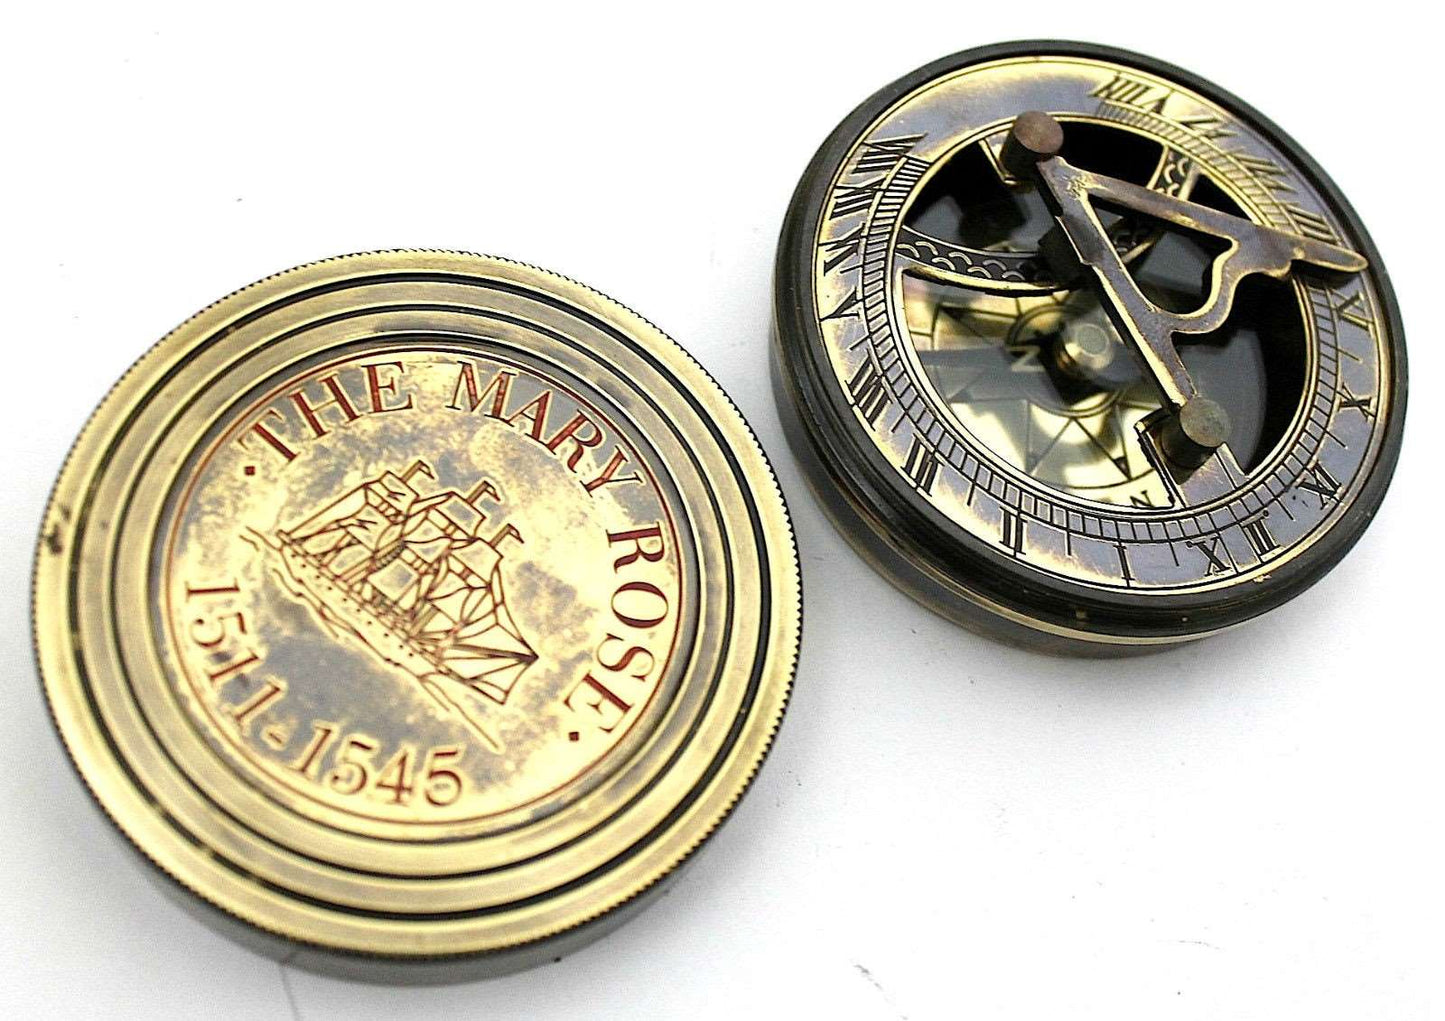 Personalized Brass Sundial Compass - Customizable Engraved Quote